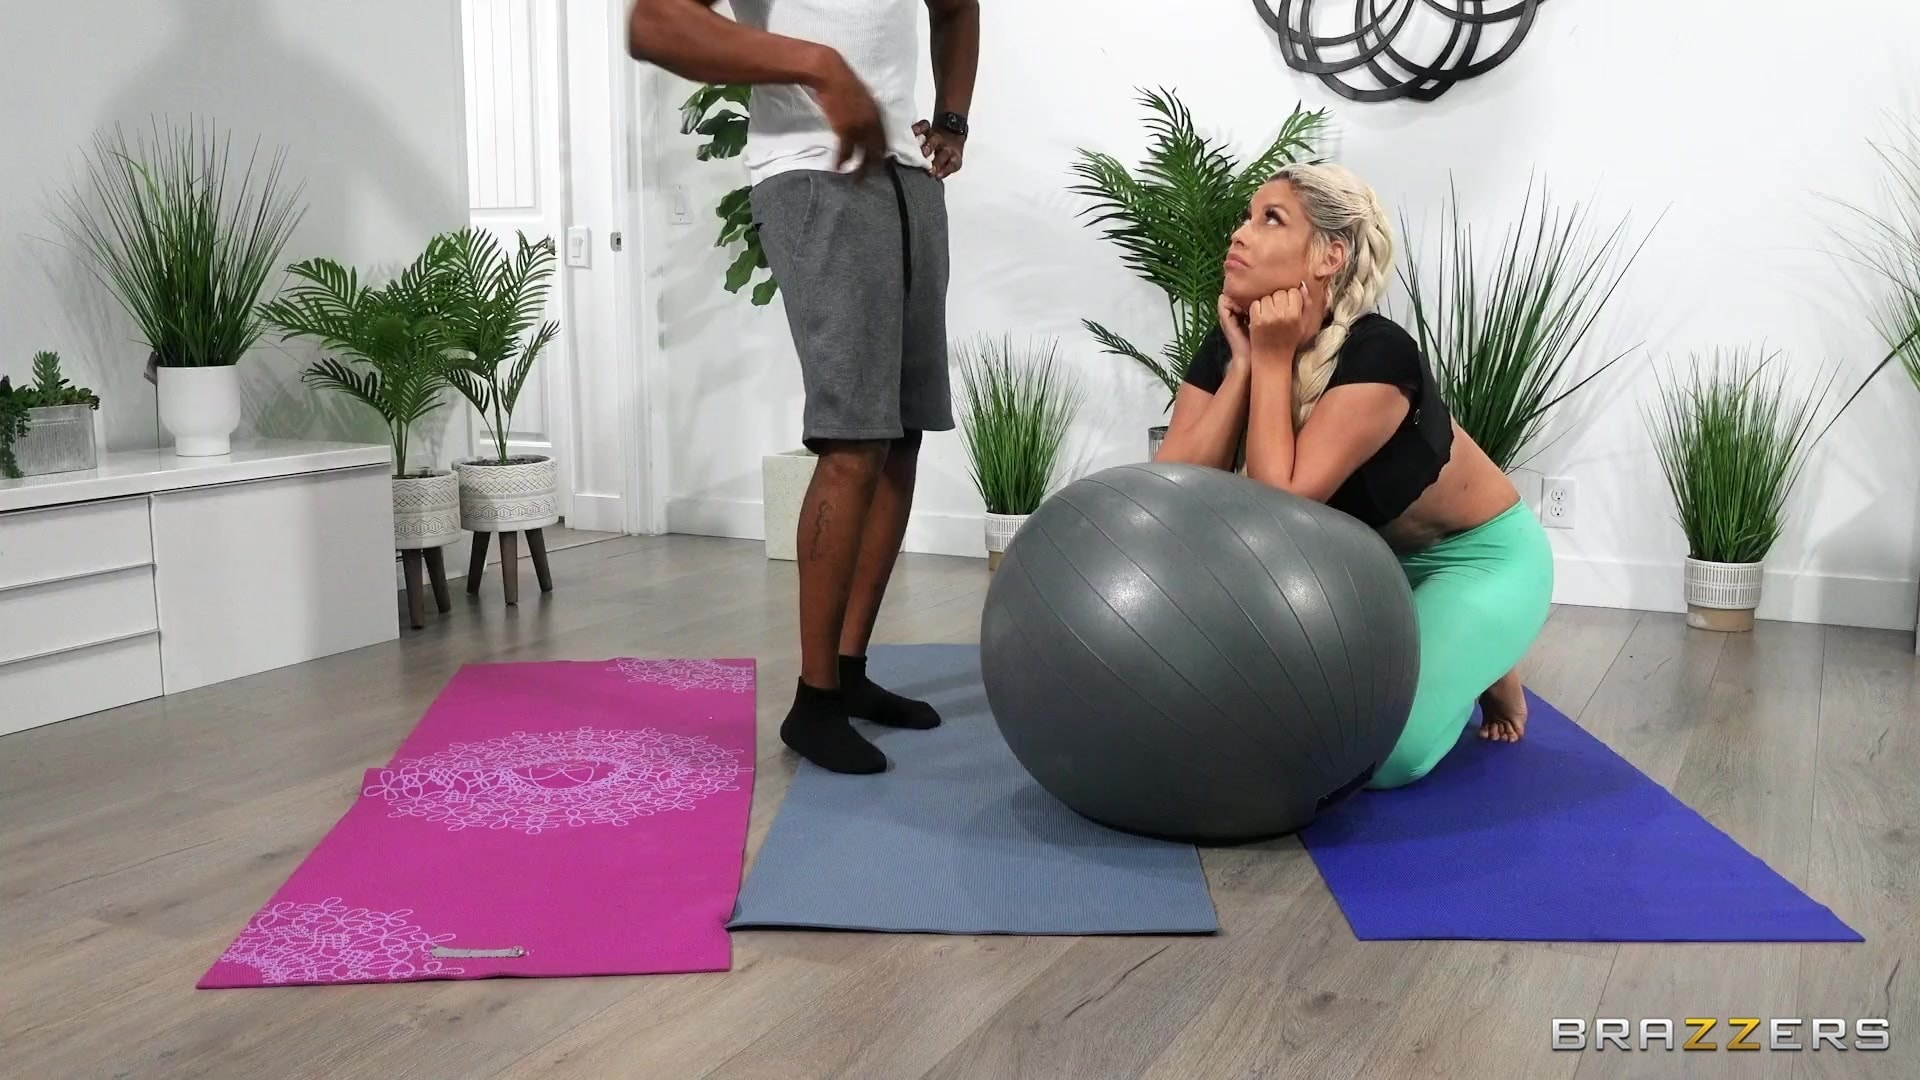 Brazzers 'Stuck Between Anal And A Workout' starring Bridgette B (Photo 2)